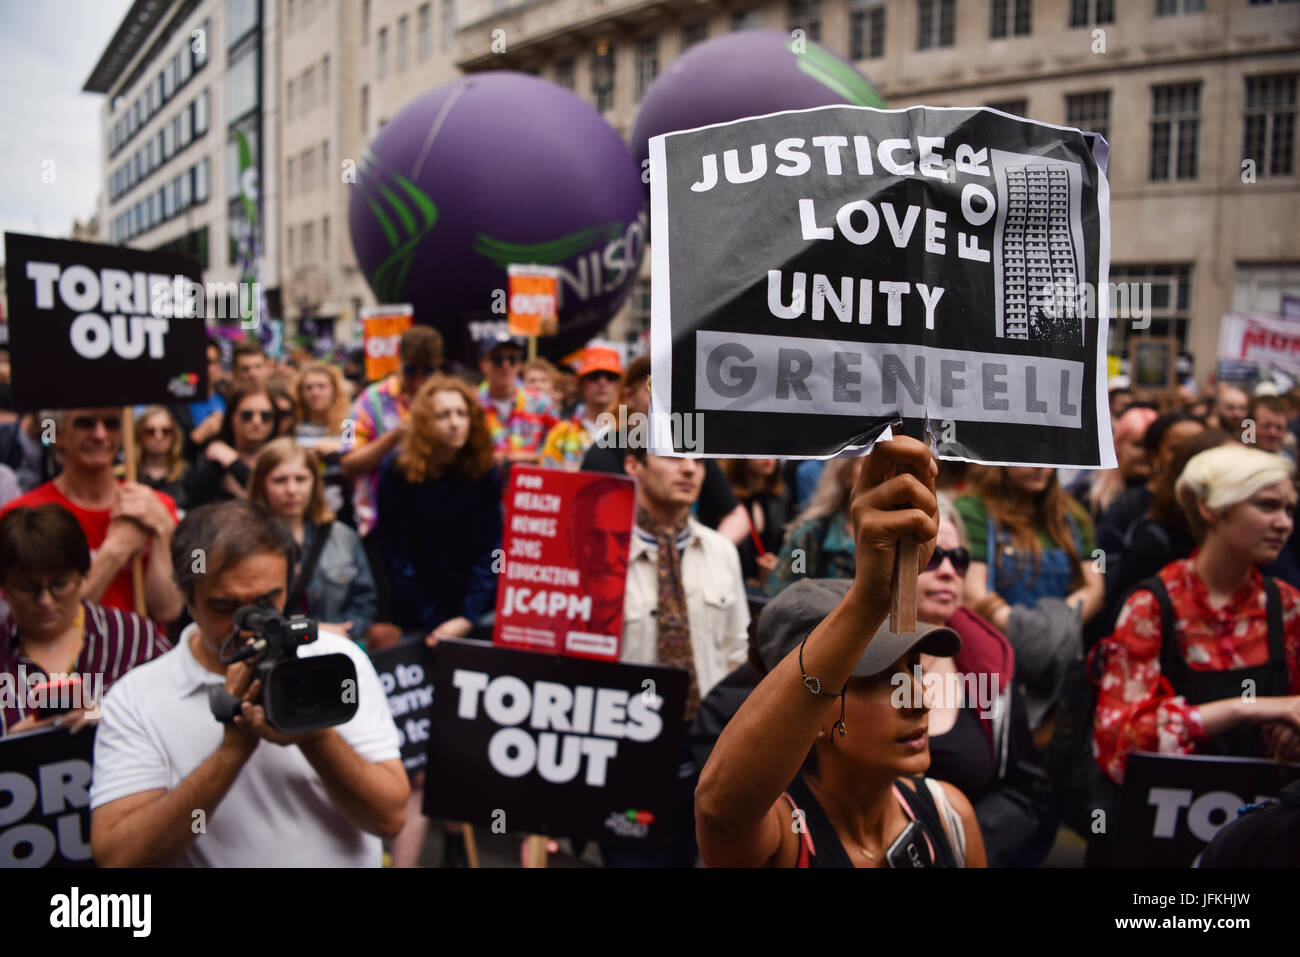 London, UK. 1st Jul, 2017. A protester holds up a 'Justice for Grenfell' sign during the Not One Day More demonstration against the Conservative government. Thousands of protesters marched from Regent Street to Parliament Square, with speechs from Diane Abbott, John McDonnell and Jeremy Corbyn. Credit: Jacob Sacks-Jones/Alamy Live News. Stock Photo